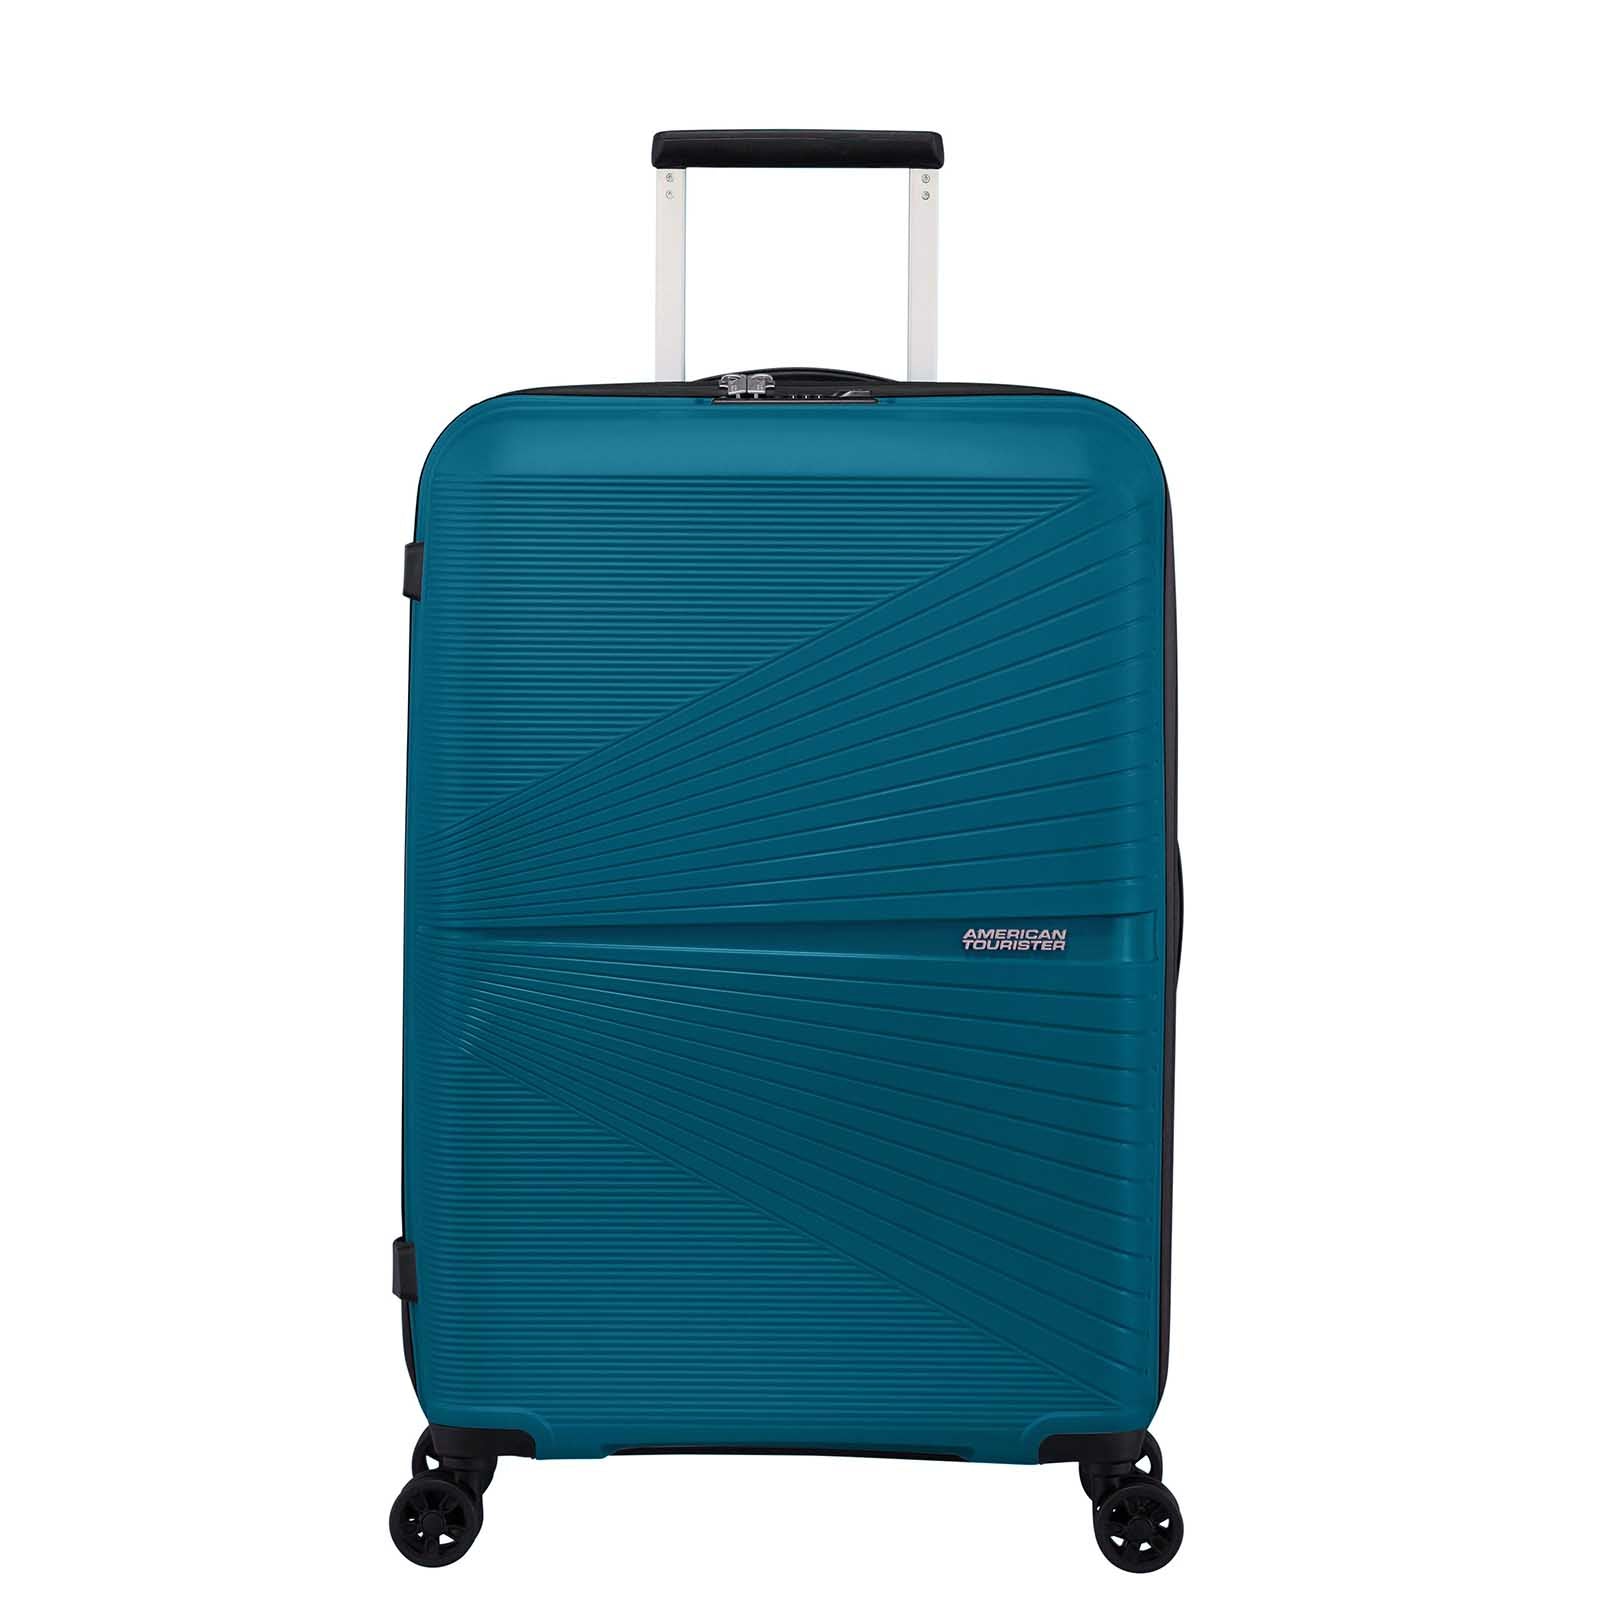 American-Tourister-Airconic-67cm-Suitcase-Deep-Ocean-Front